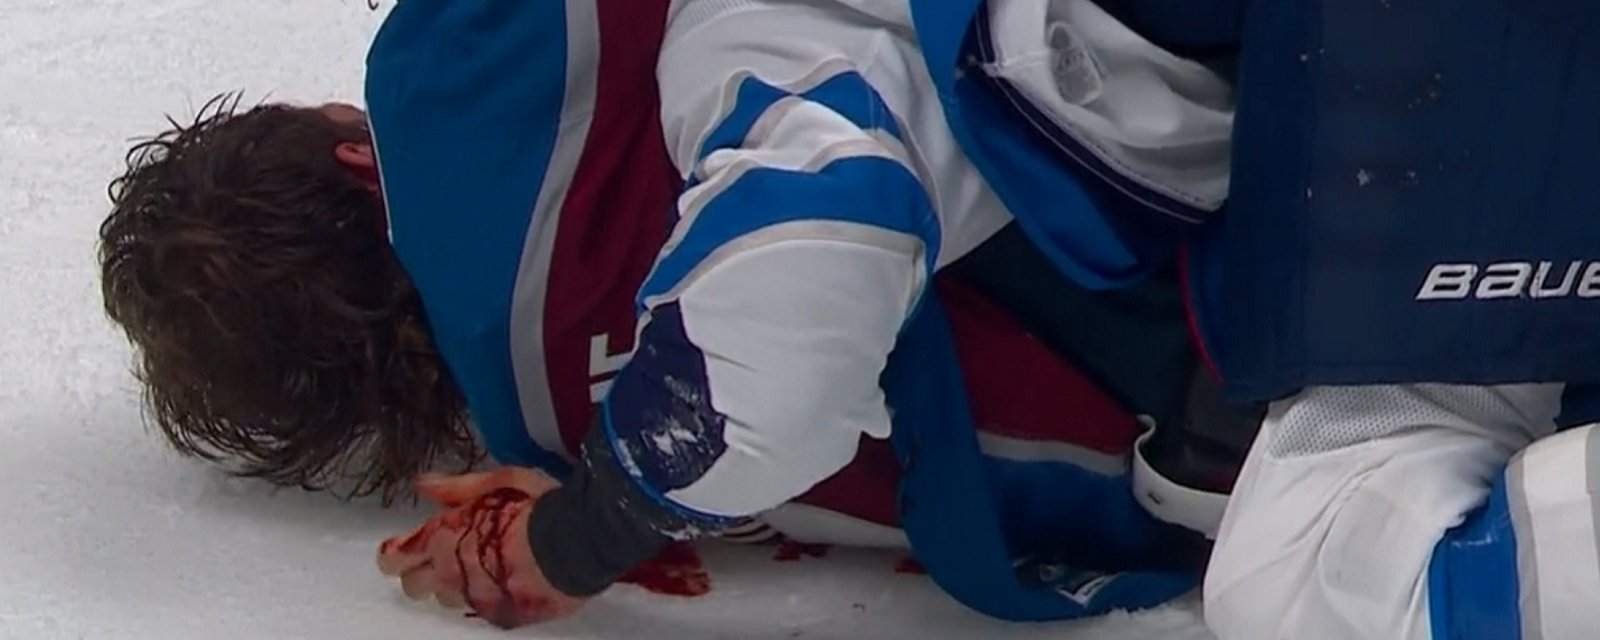 Closer look at Brendan Dillon's injury after brawl in Game 3.